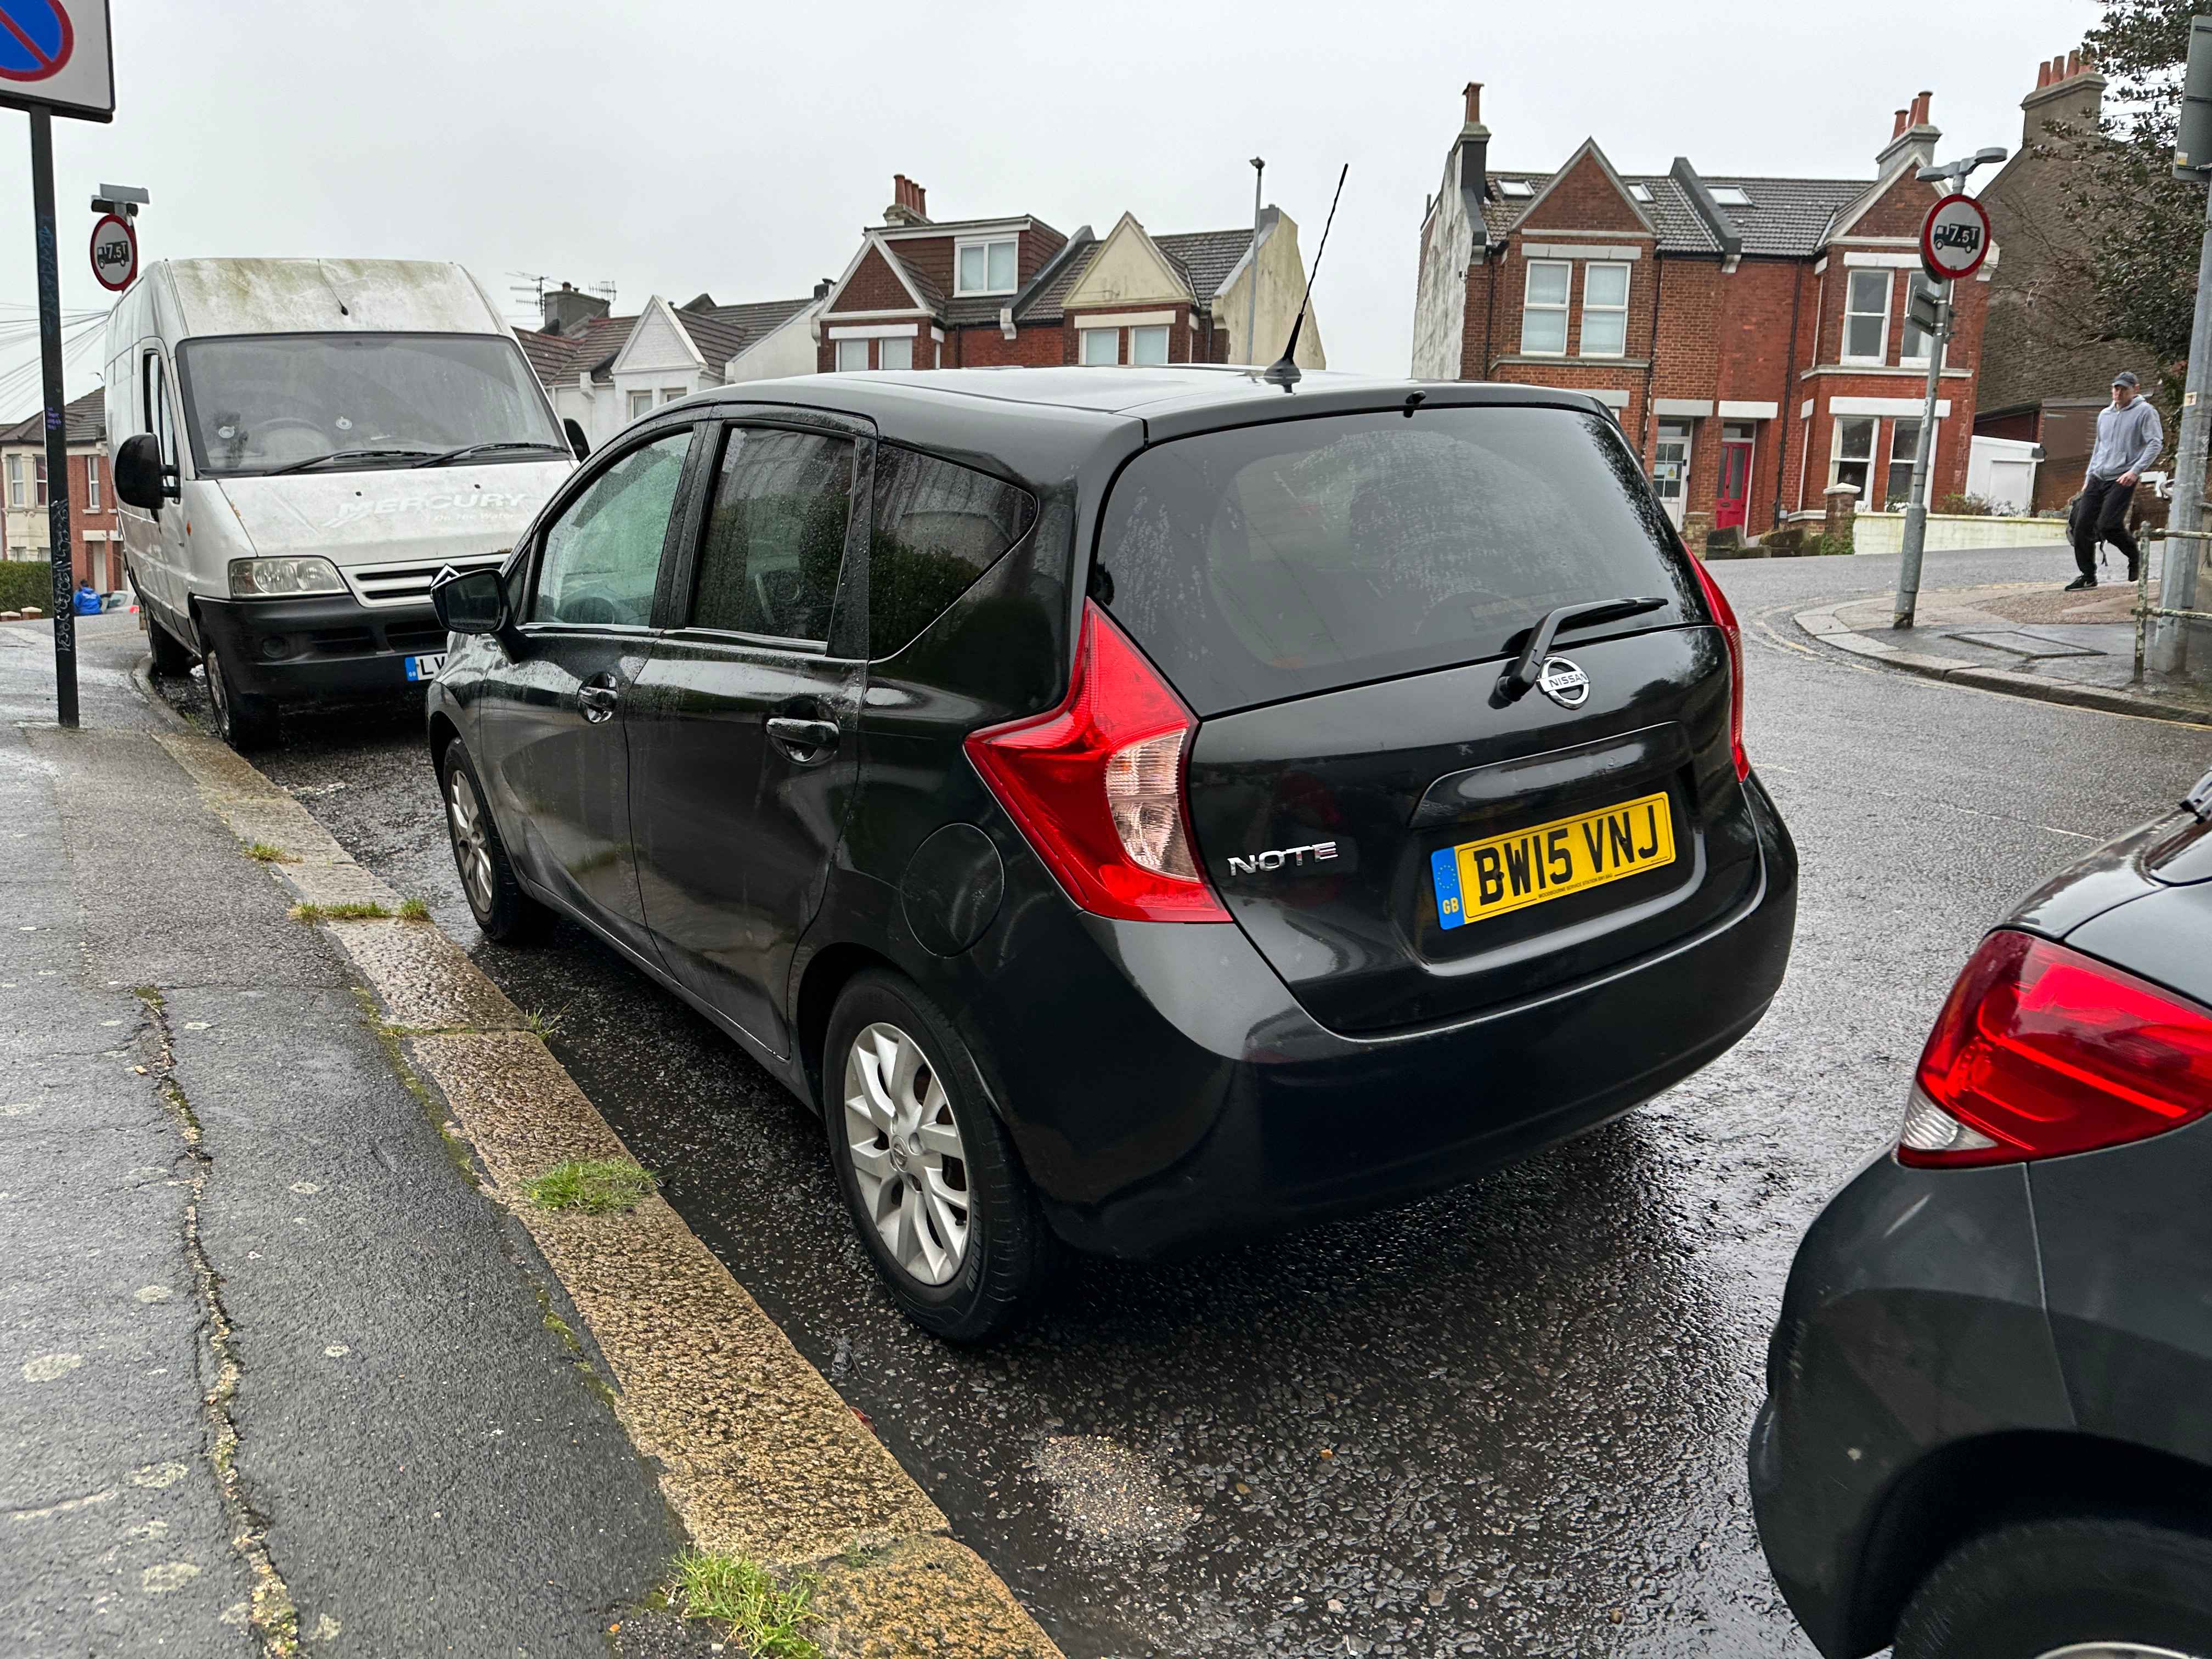 Photograph of BW15 VNJ - a Black Nissan Note parked in Hollingdean by a non-resident who uses the local area as part of their Brighton commute. The fifteenth of fifteen photographs supplied by the residents of Hollingdean.